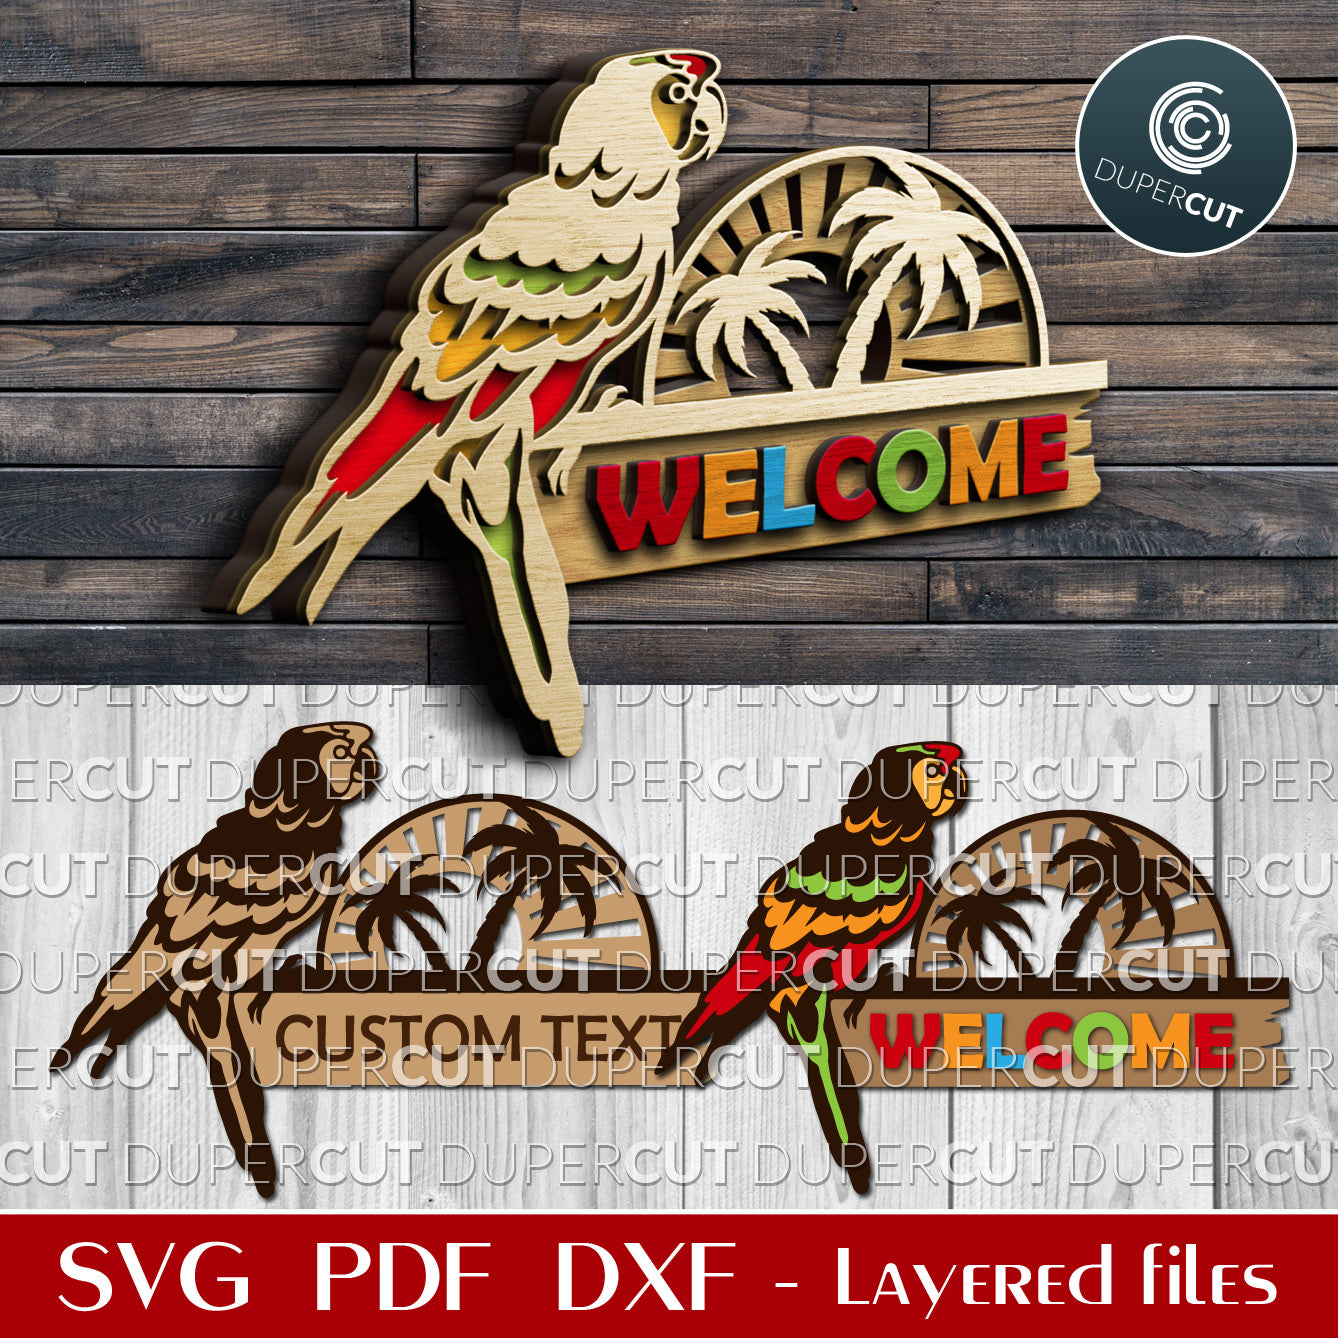 Tropical welcome sign with parrot and palm trees - SVG PDF DXF layered cutting files for Glowforge, Cricut, Silhouette Cameo, laser machines